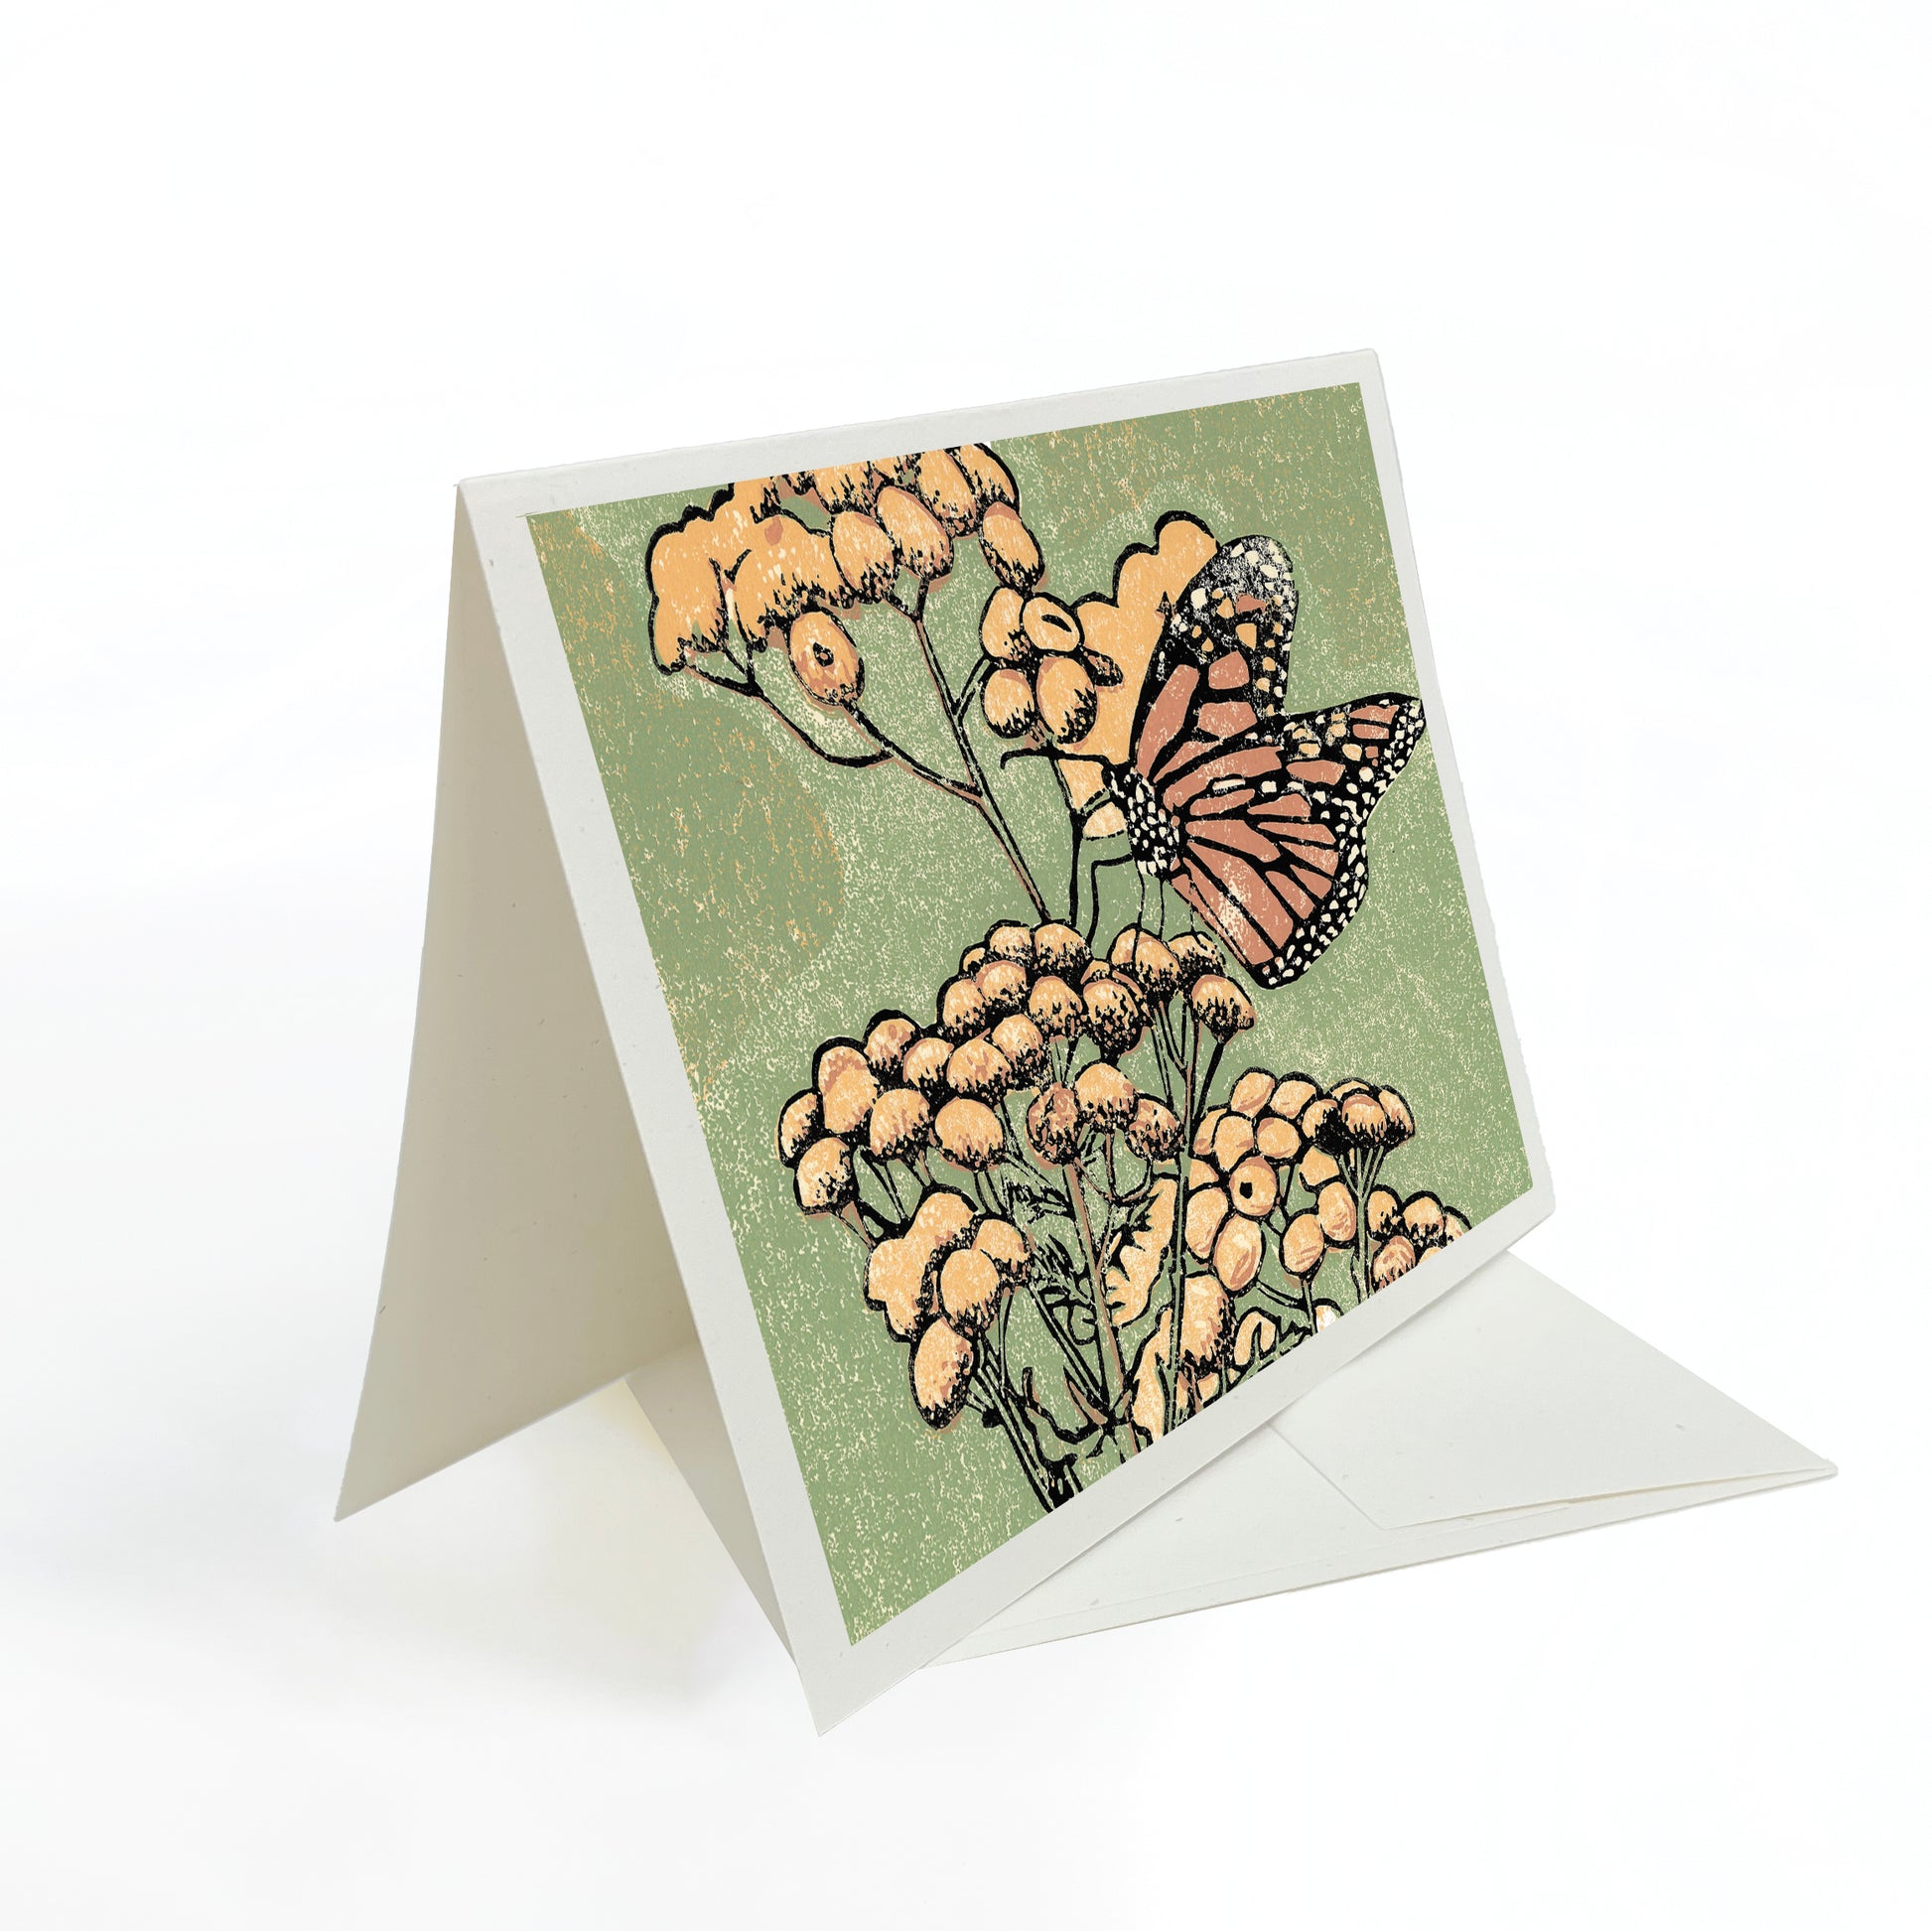 A casually elegant card featuring monarch butterfly art by Natalia Wohletz titled Monarch on Tansy.